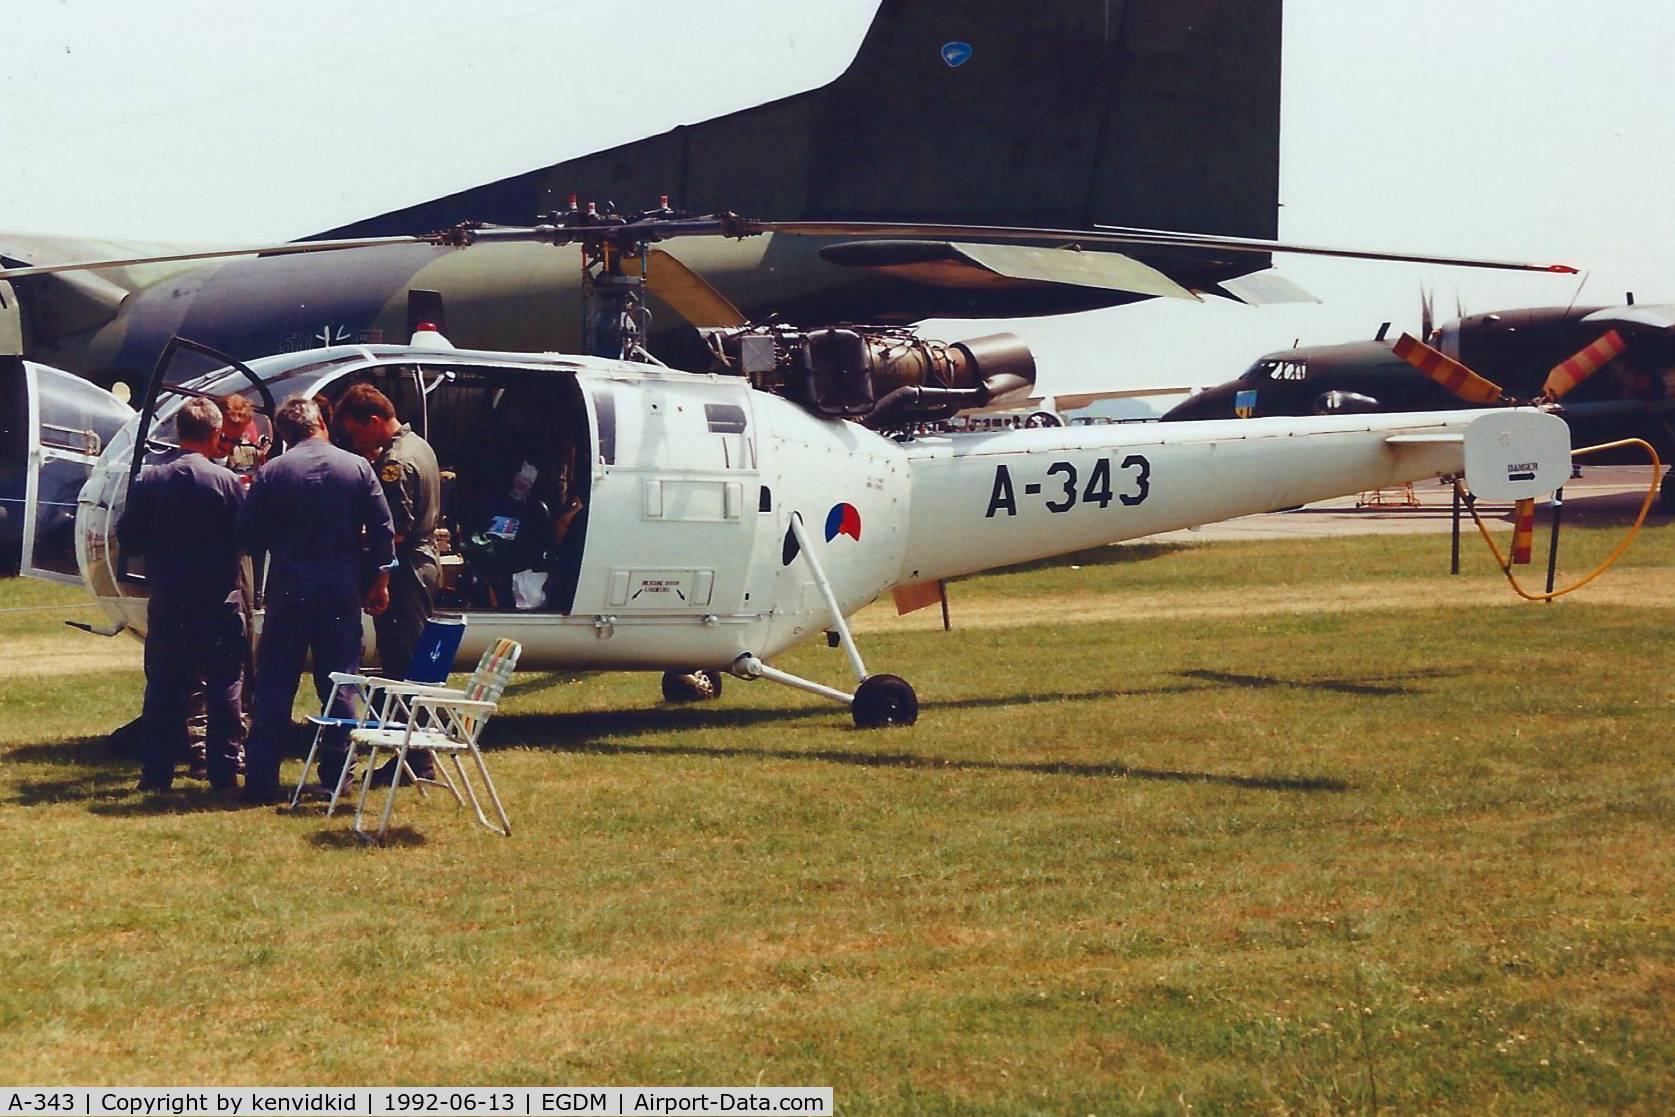 A-343, 1965 Aerospatiale SA-316B Alouette III C/N 1343, At Boscombe Down, scanned from print.